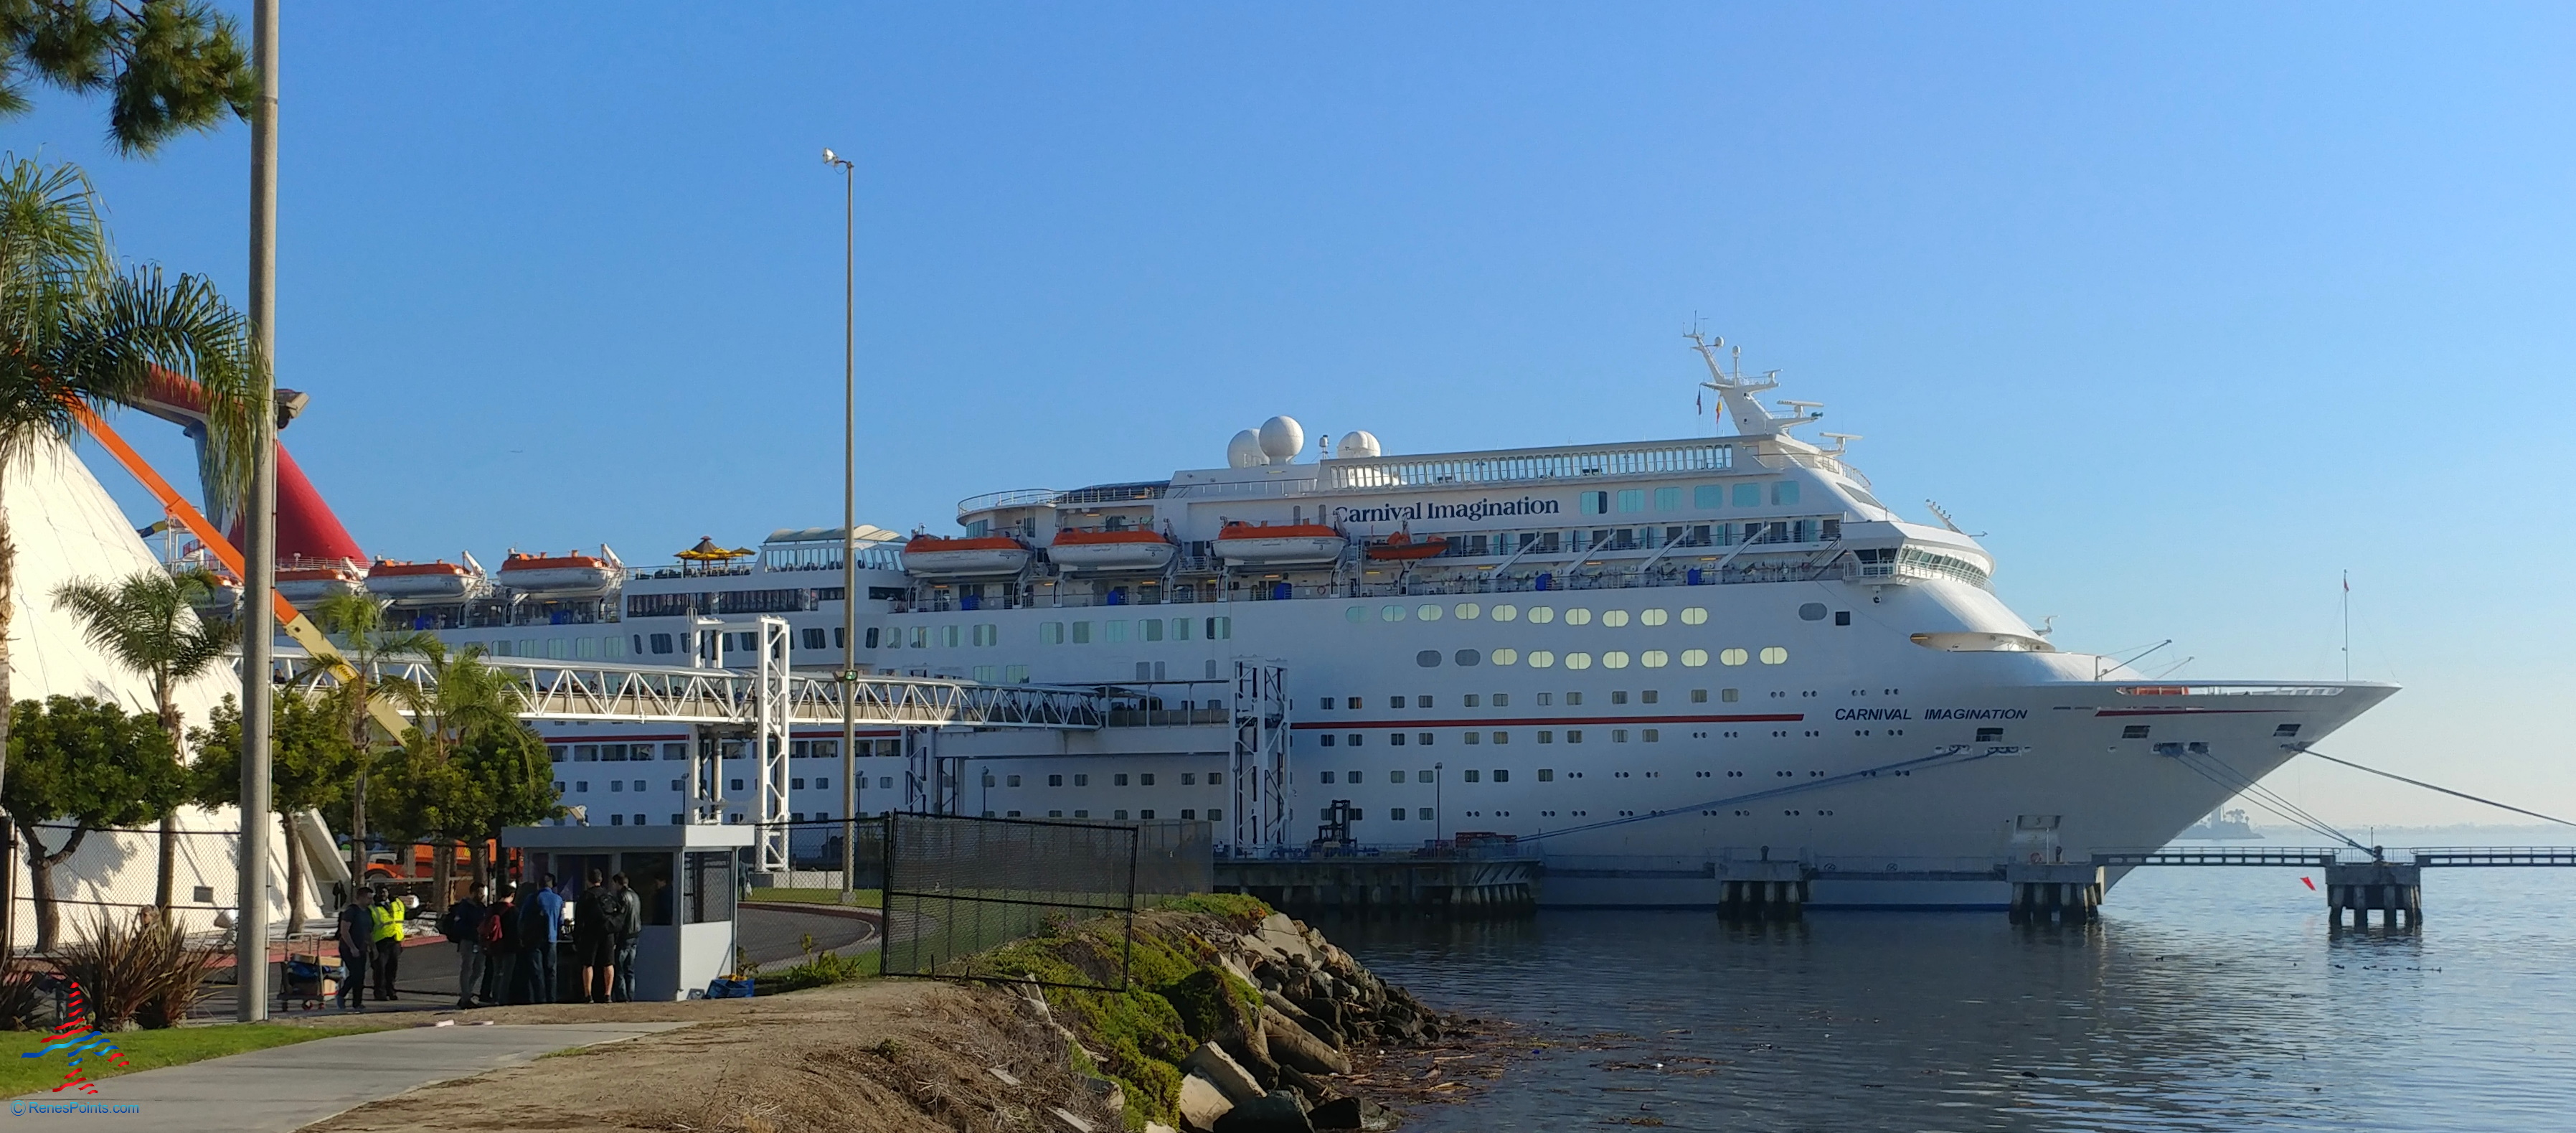 Are Carnival Cruises as bad as everyone says? My Carnival Imagination Review from Long Beach ...